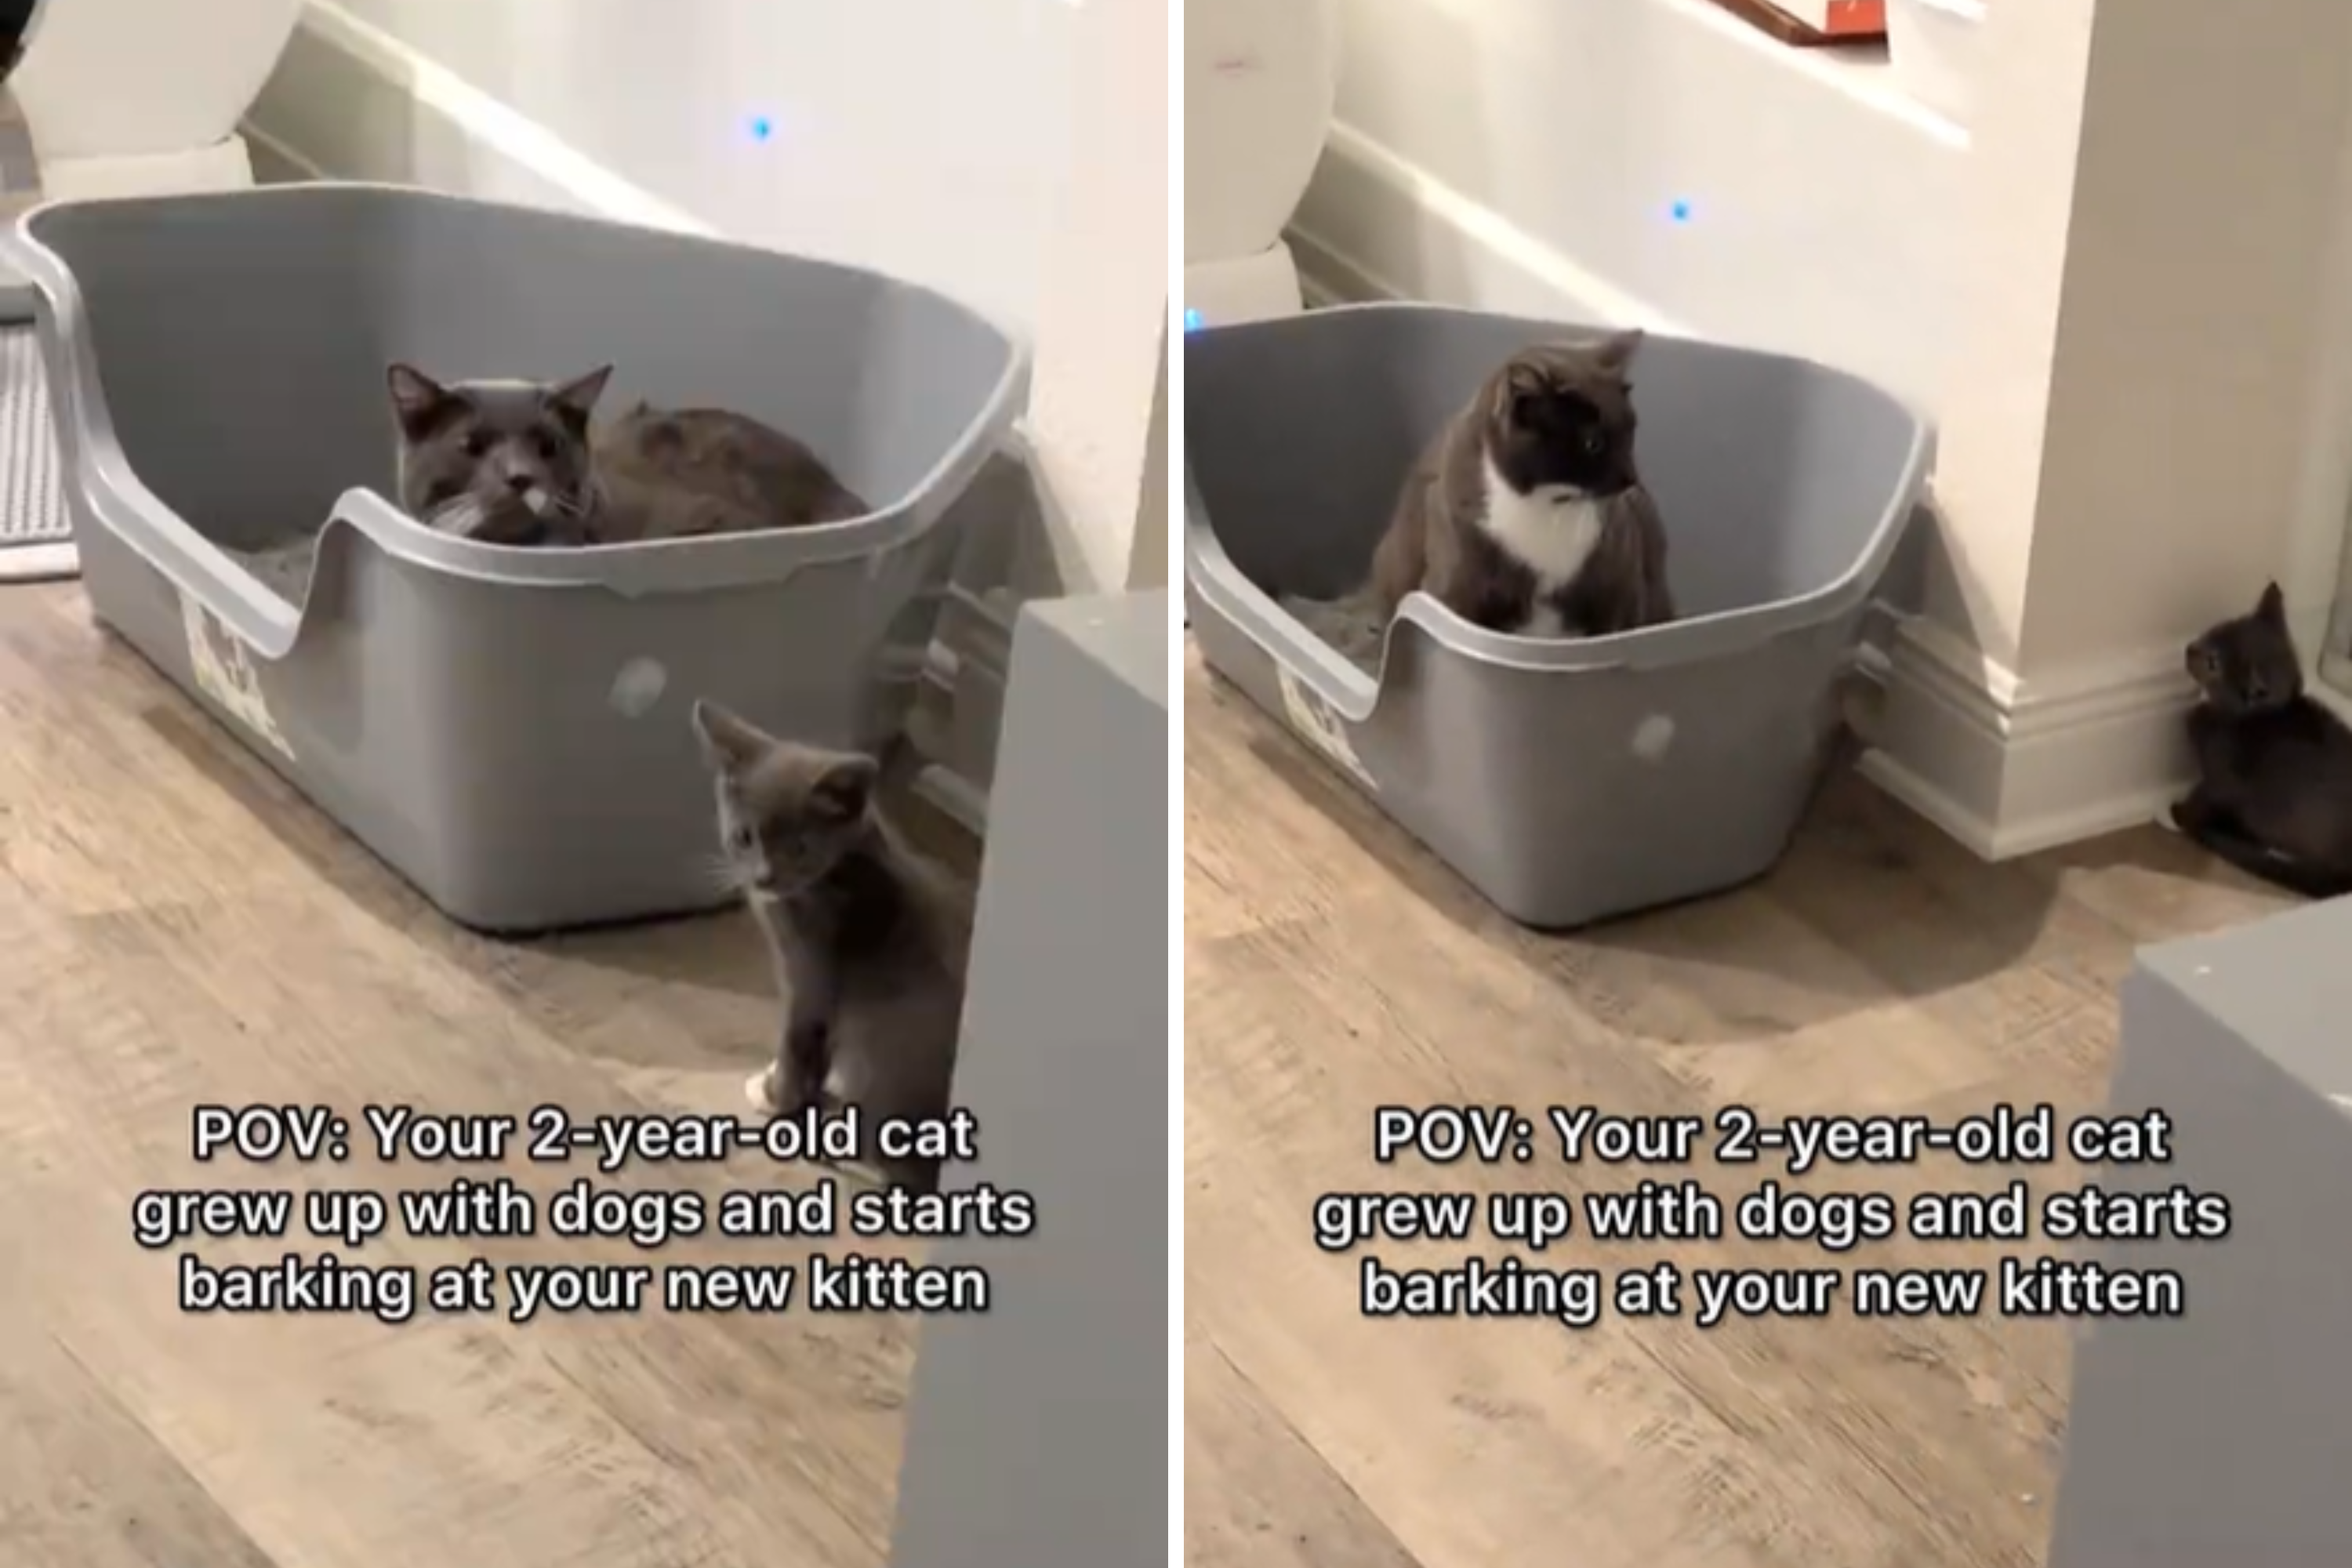 Cat raised by dogs, starts "barking" at new kitten in viral video